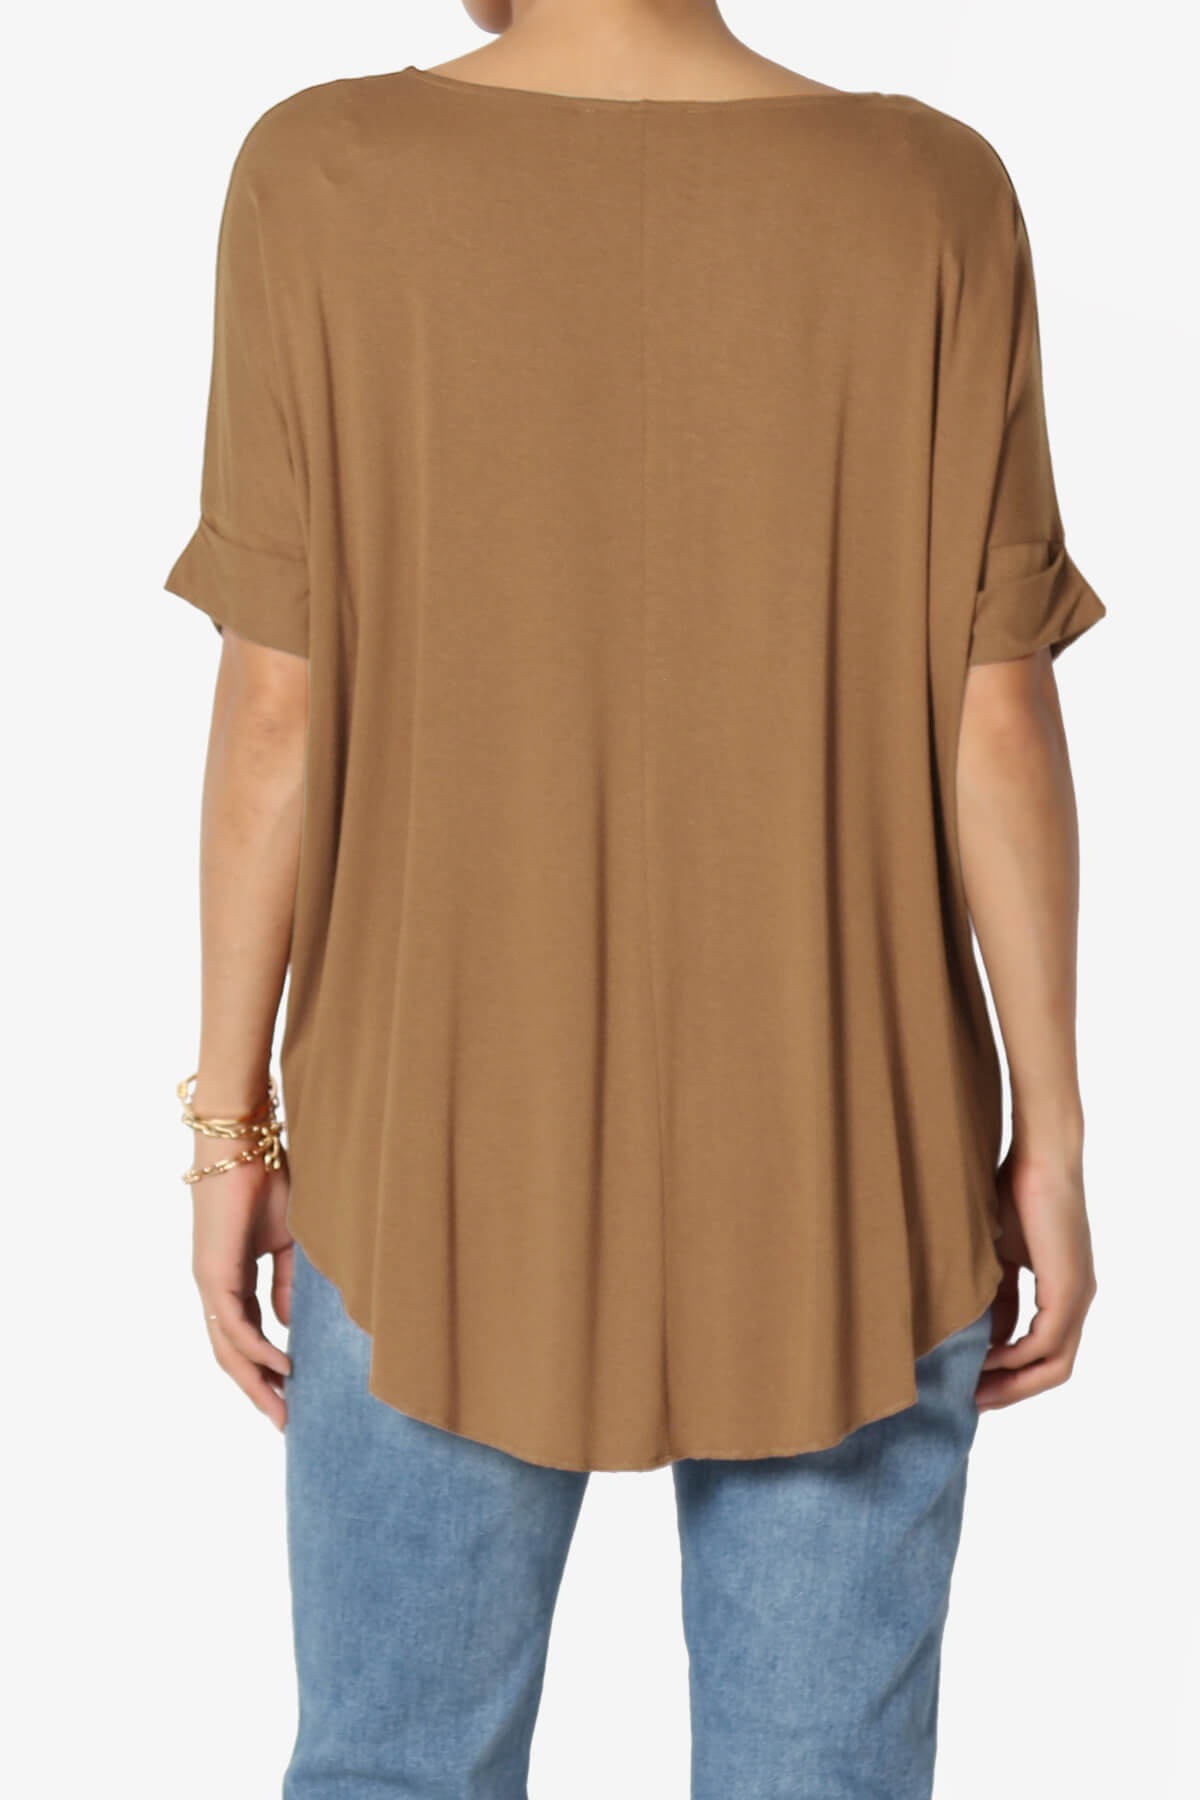 Load image into Gallery viewer, Tackle Wrap Hi-Low Crepe Knit Top DEEP CAMEL_2
